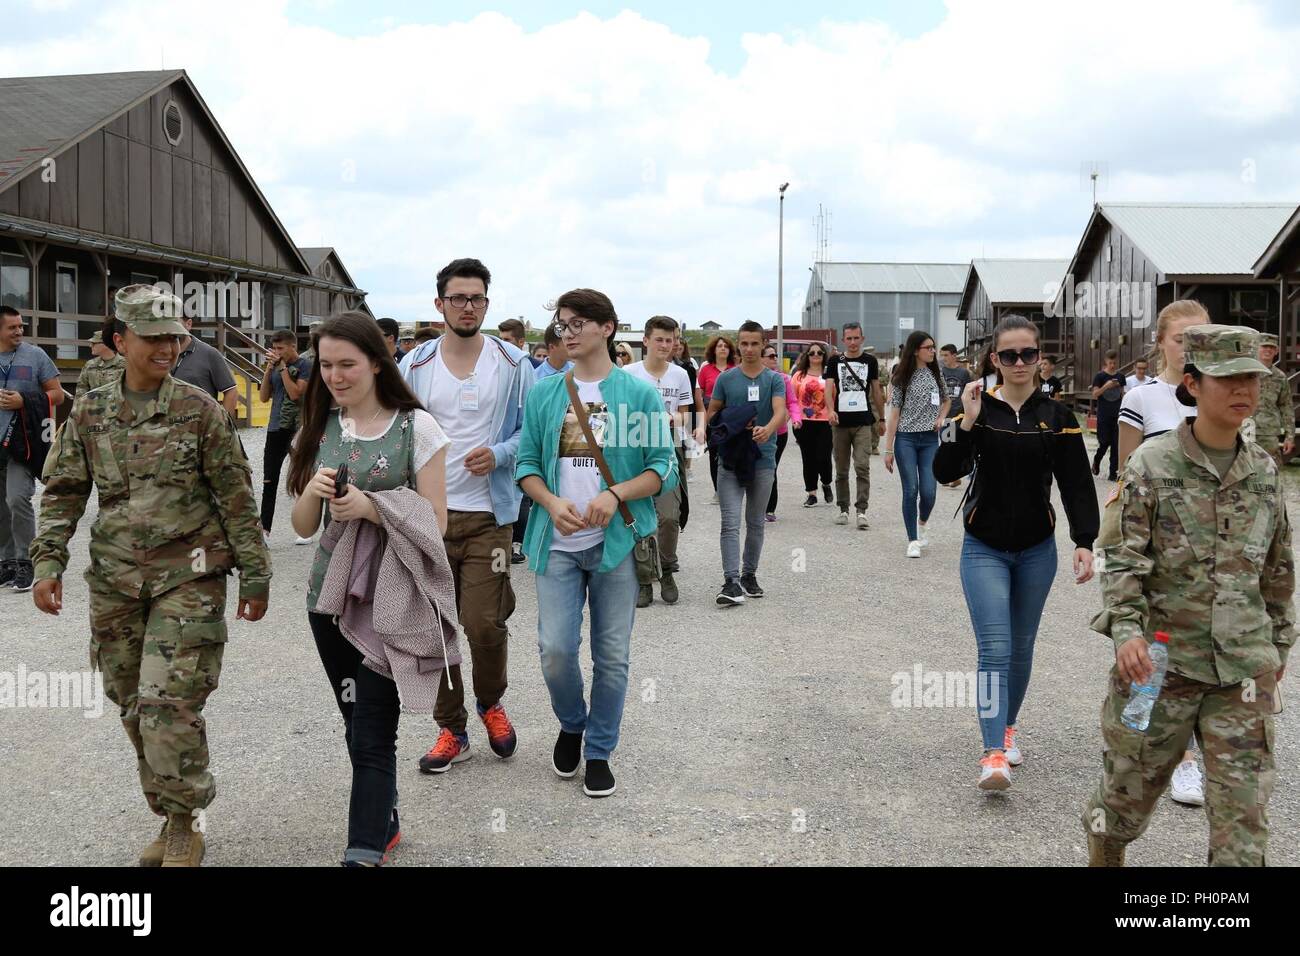 Albanian and Kosovar-Serbian youth tour Camp Bondsteel, Kosovo, on June 16. The visit came about as part of a NATO-appreciation initiative by the U.S. Embassy in Albania. Stock Photo